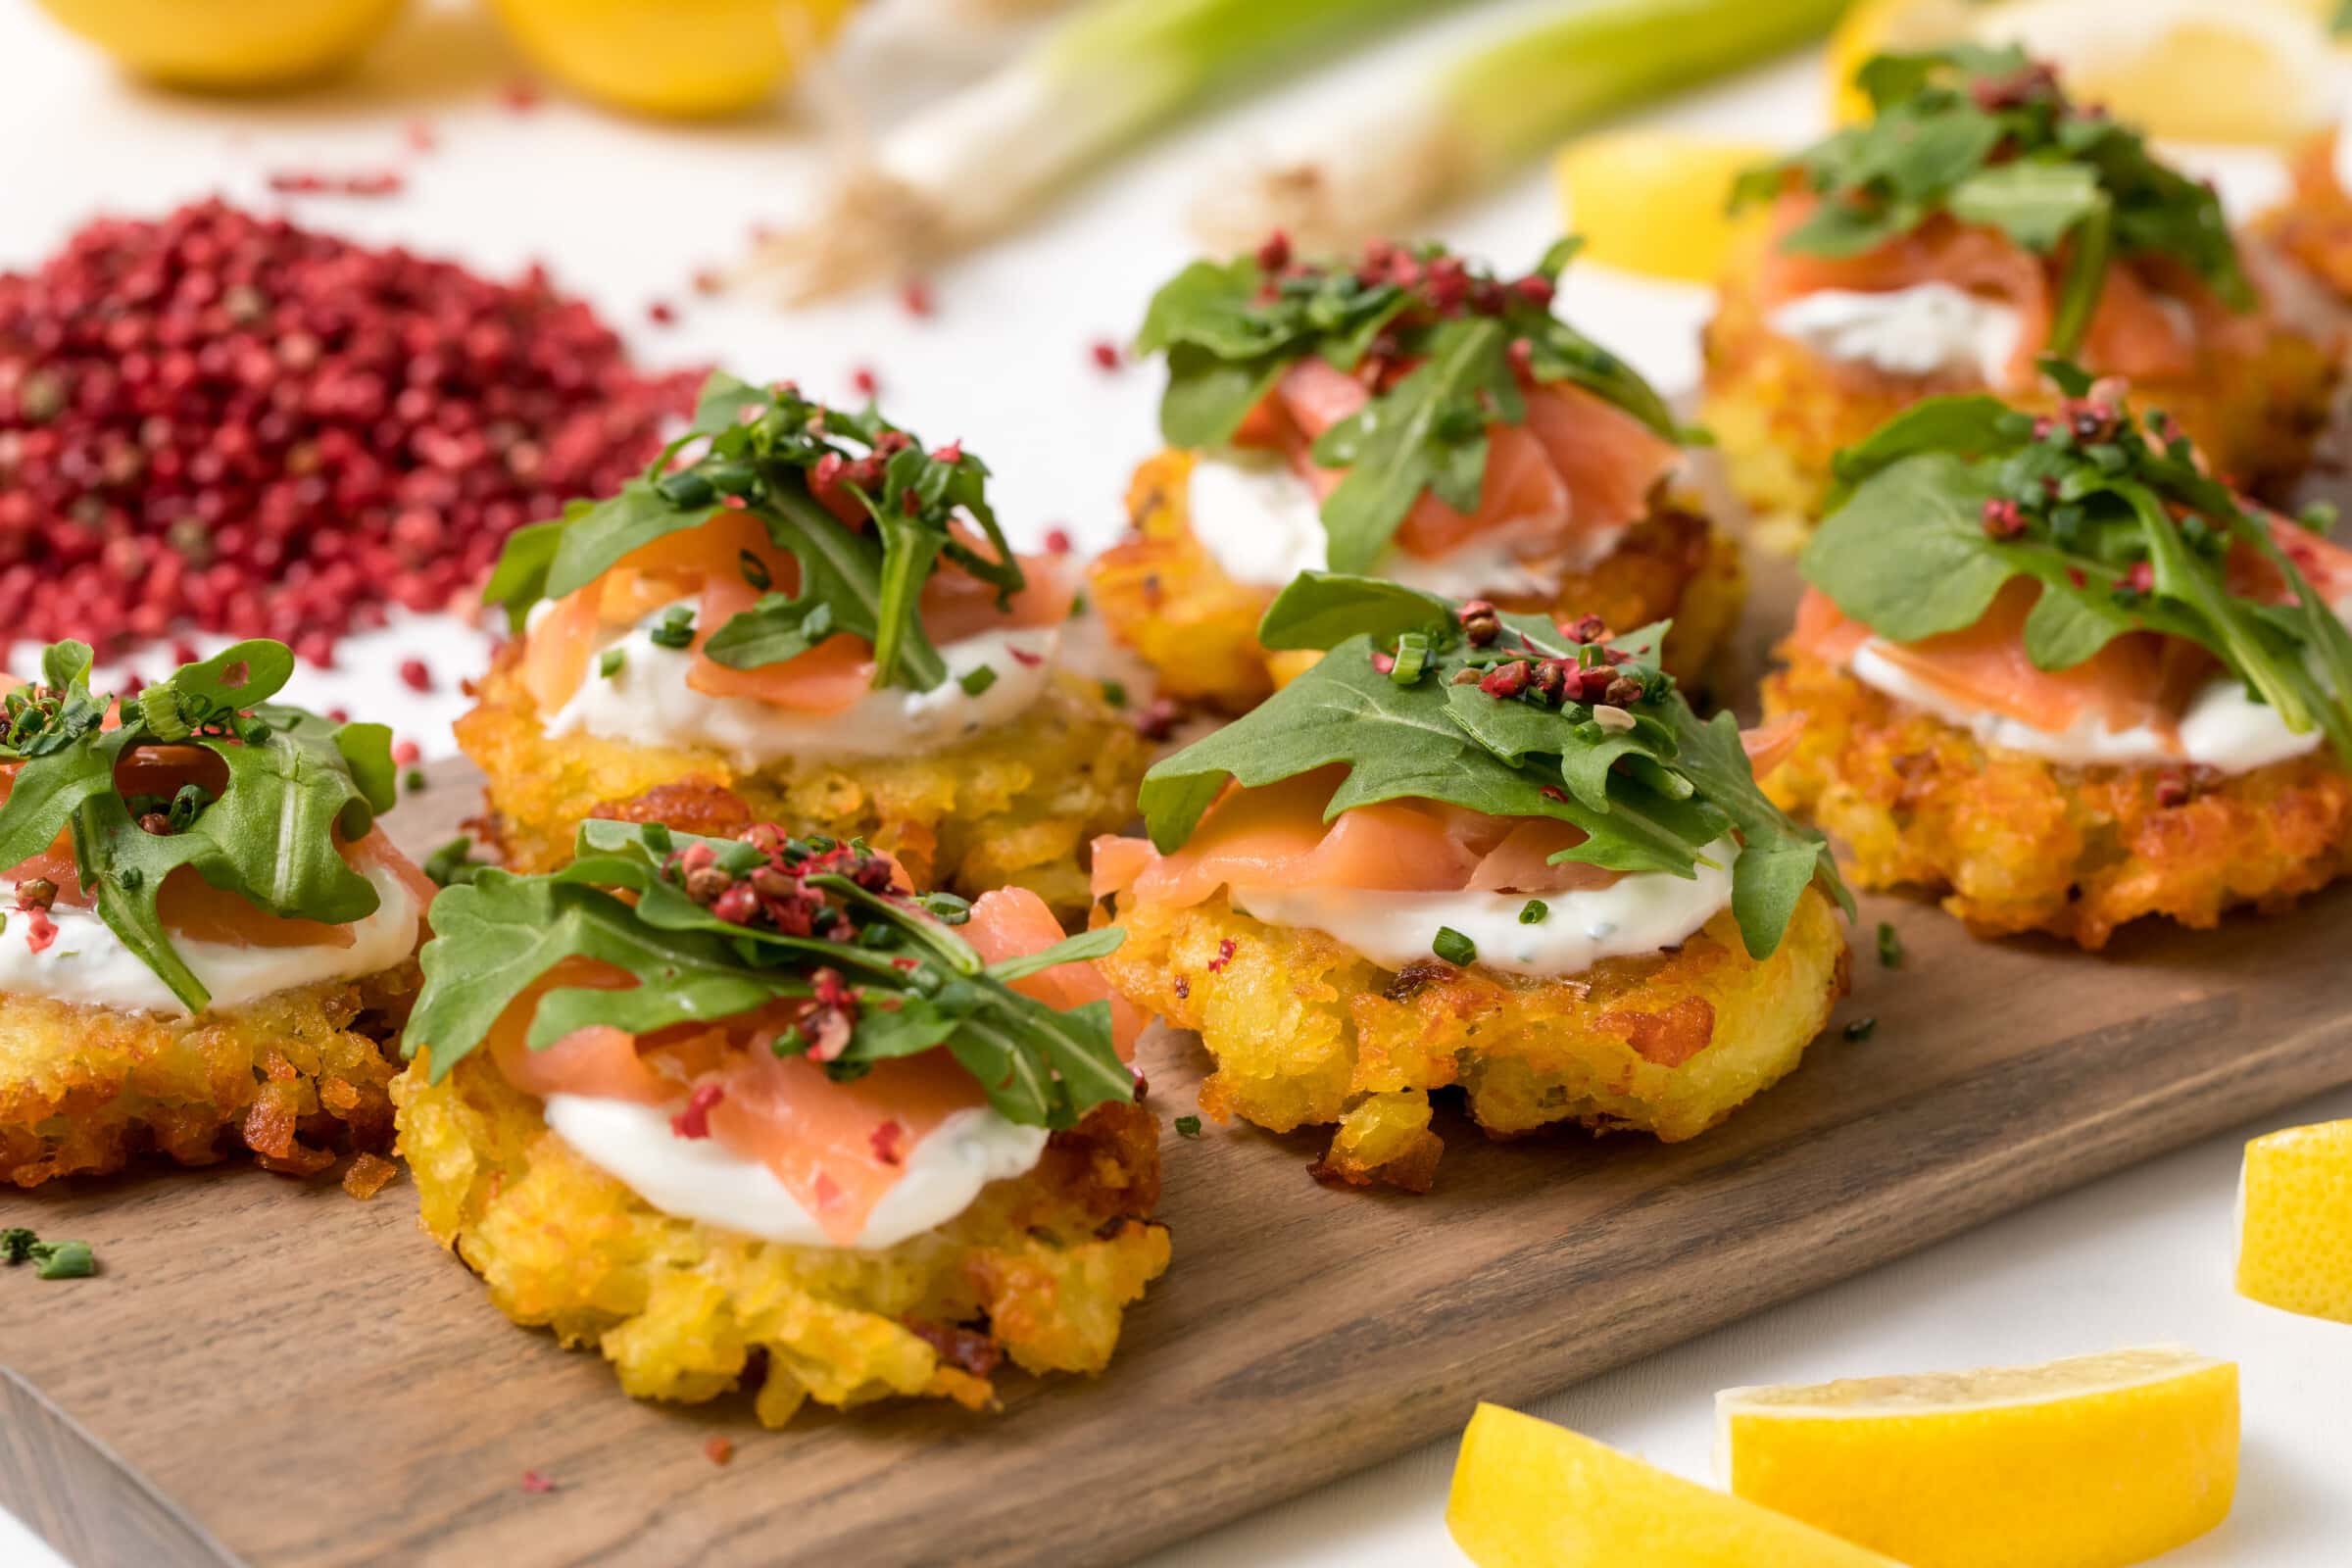 Smoked Salmon Potato Cakes With Herbed Cream Pink Peppercorns Are The Perfect Holiday Party Appetizer